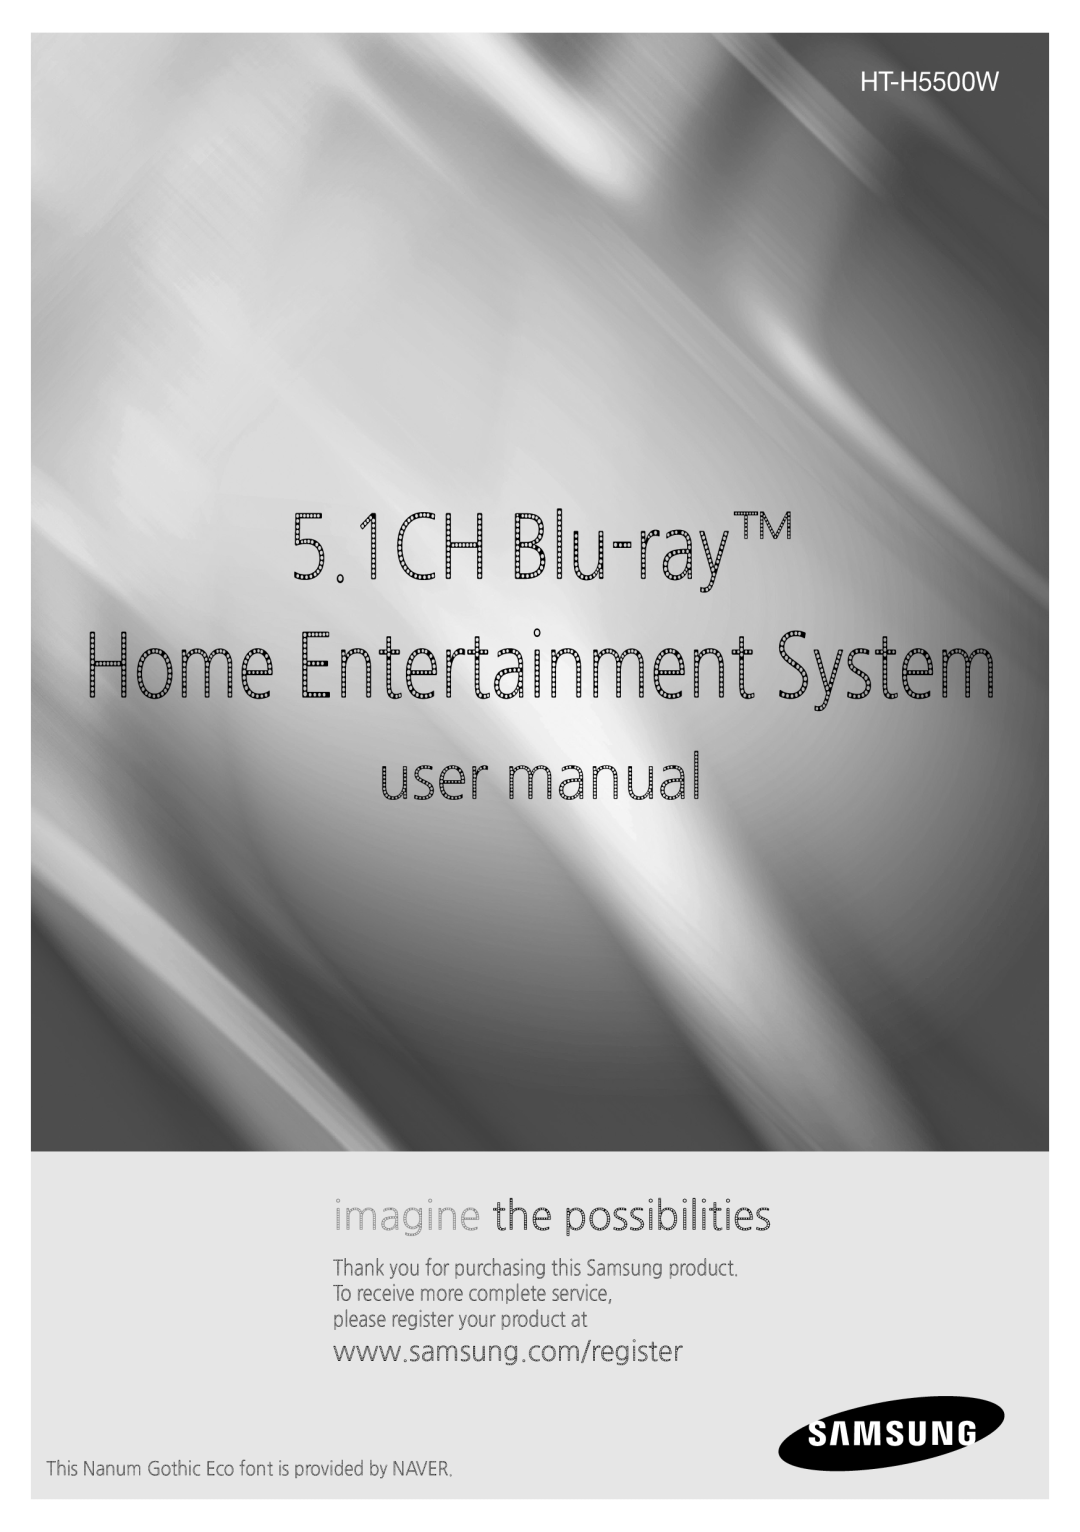 Samsung HTH5500 user manual 5.1CH Blu-ray, Home Entertainment System, imagine the possibilities, HT-H5500W 